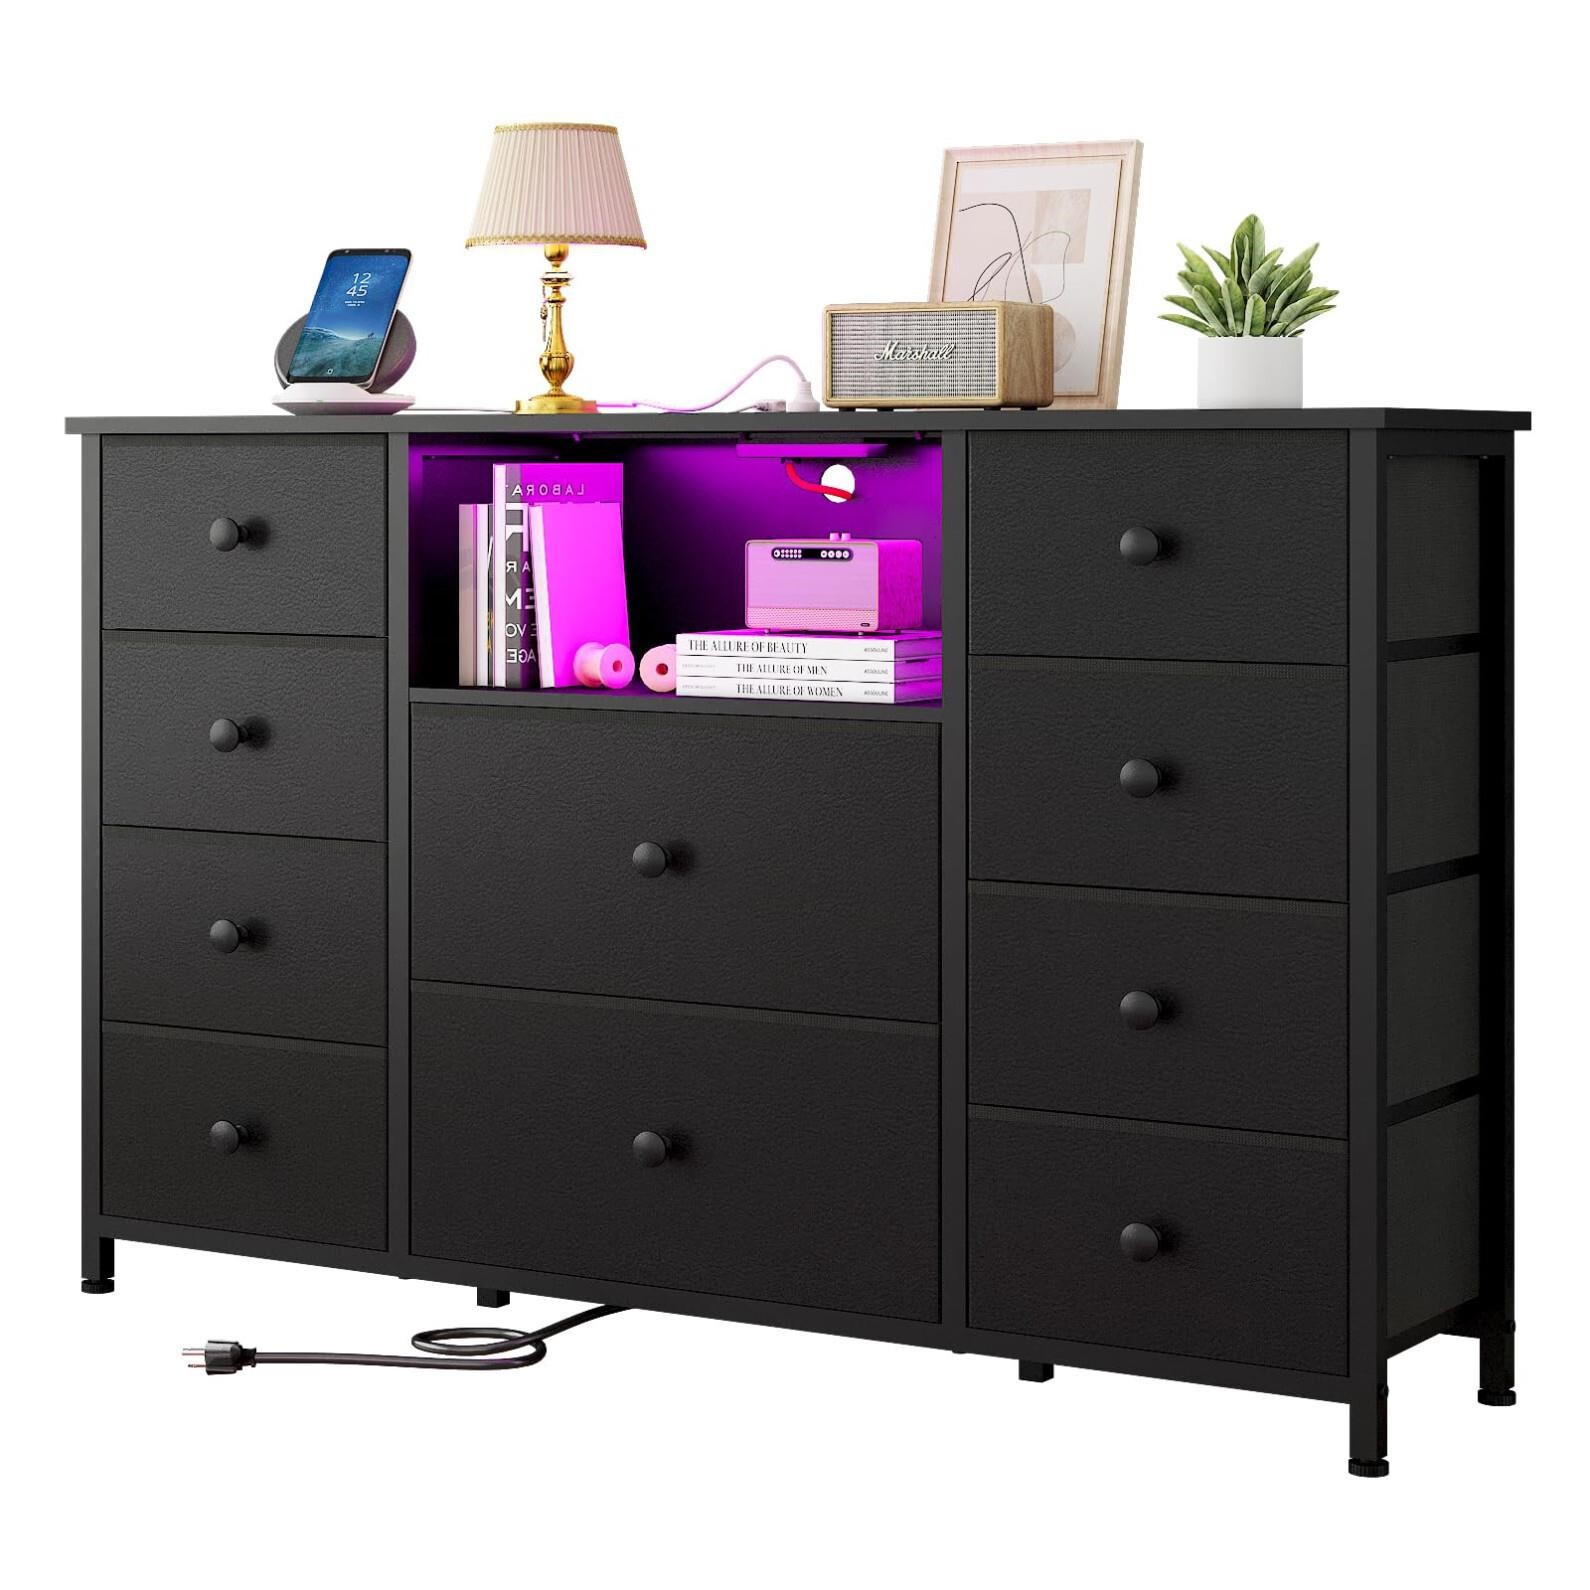 LDTTCUK Dresser with Charging Station and LED Ligh